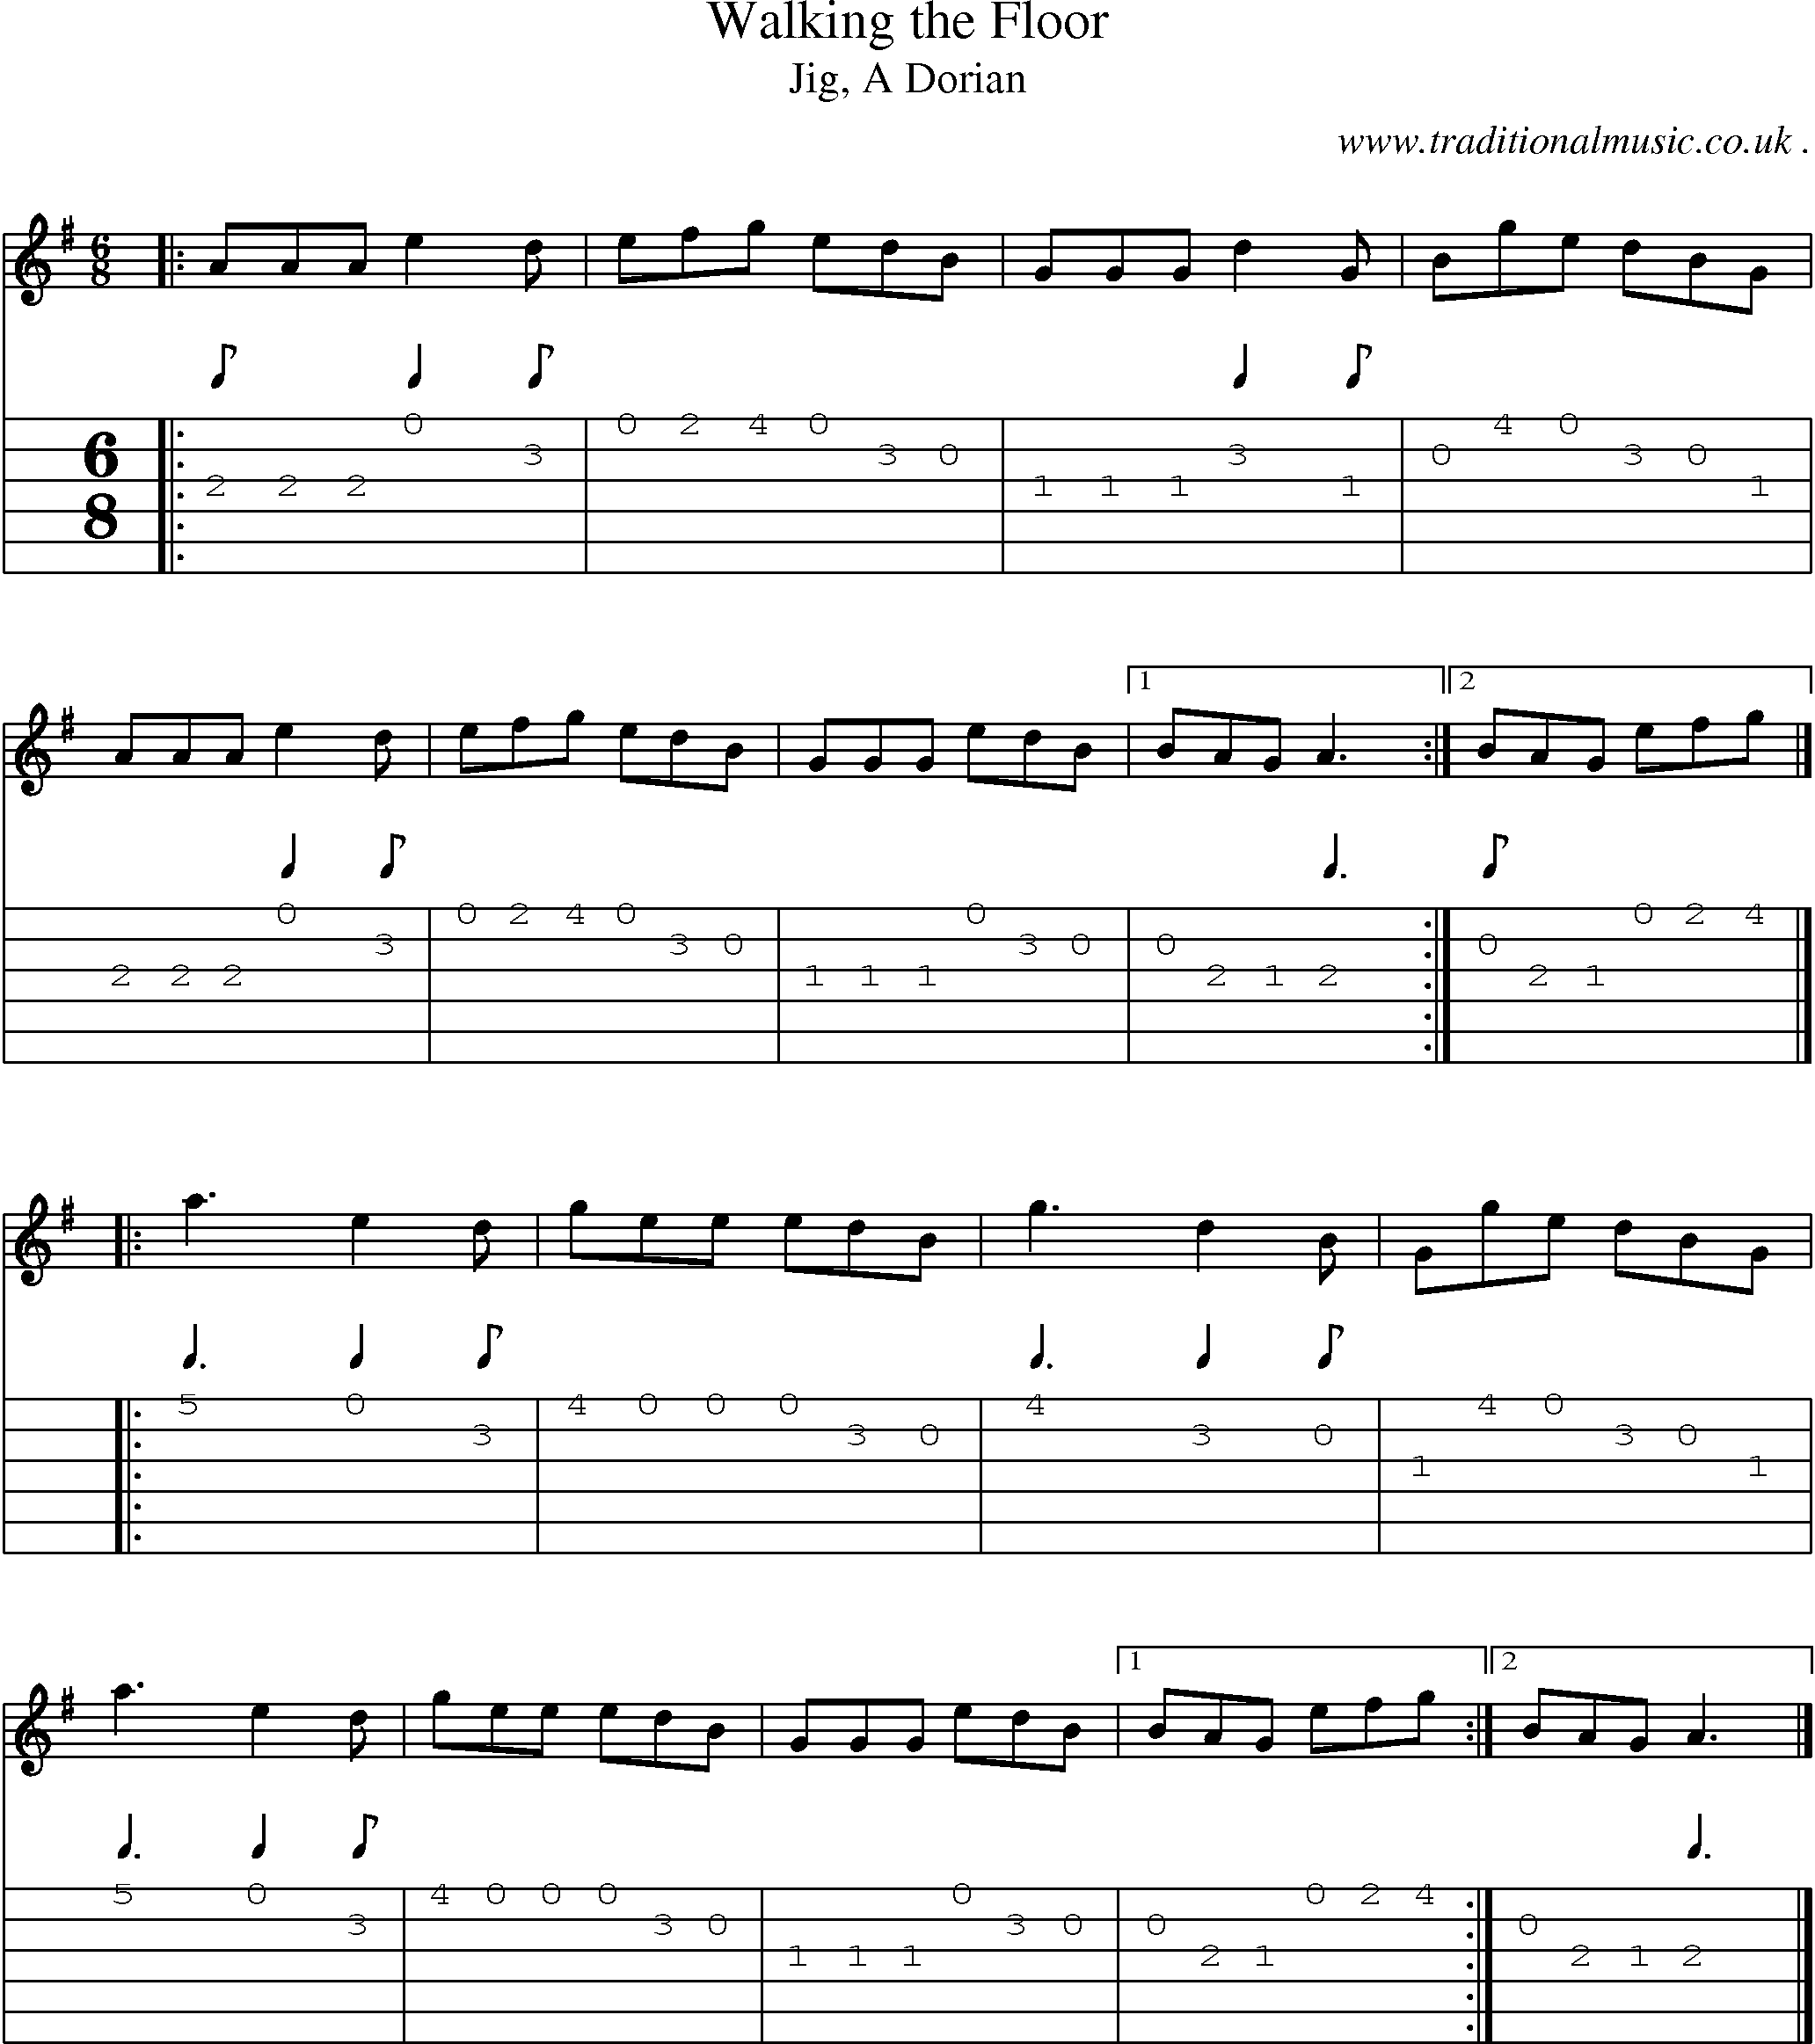 Sheet-music  score, Chords and Guitar Tabs for Walking The Floor